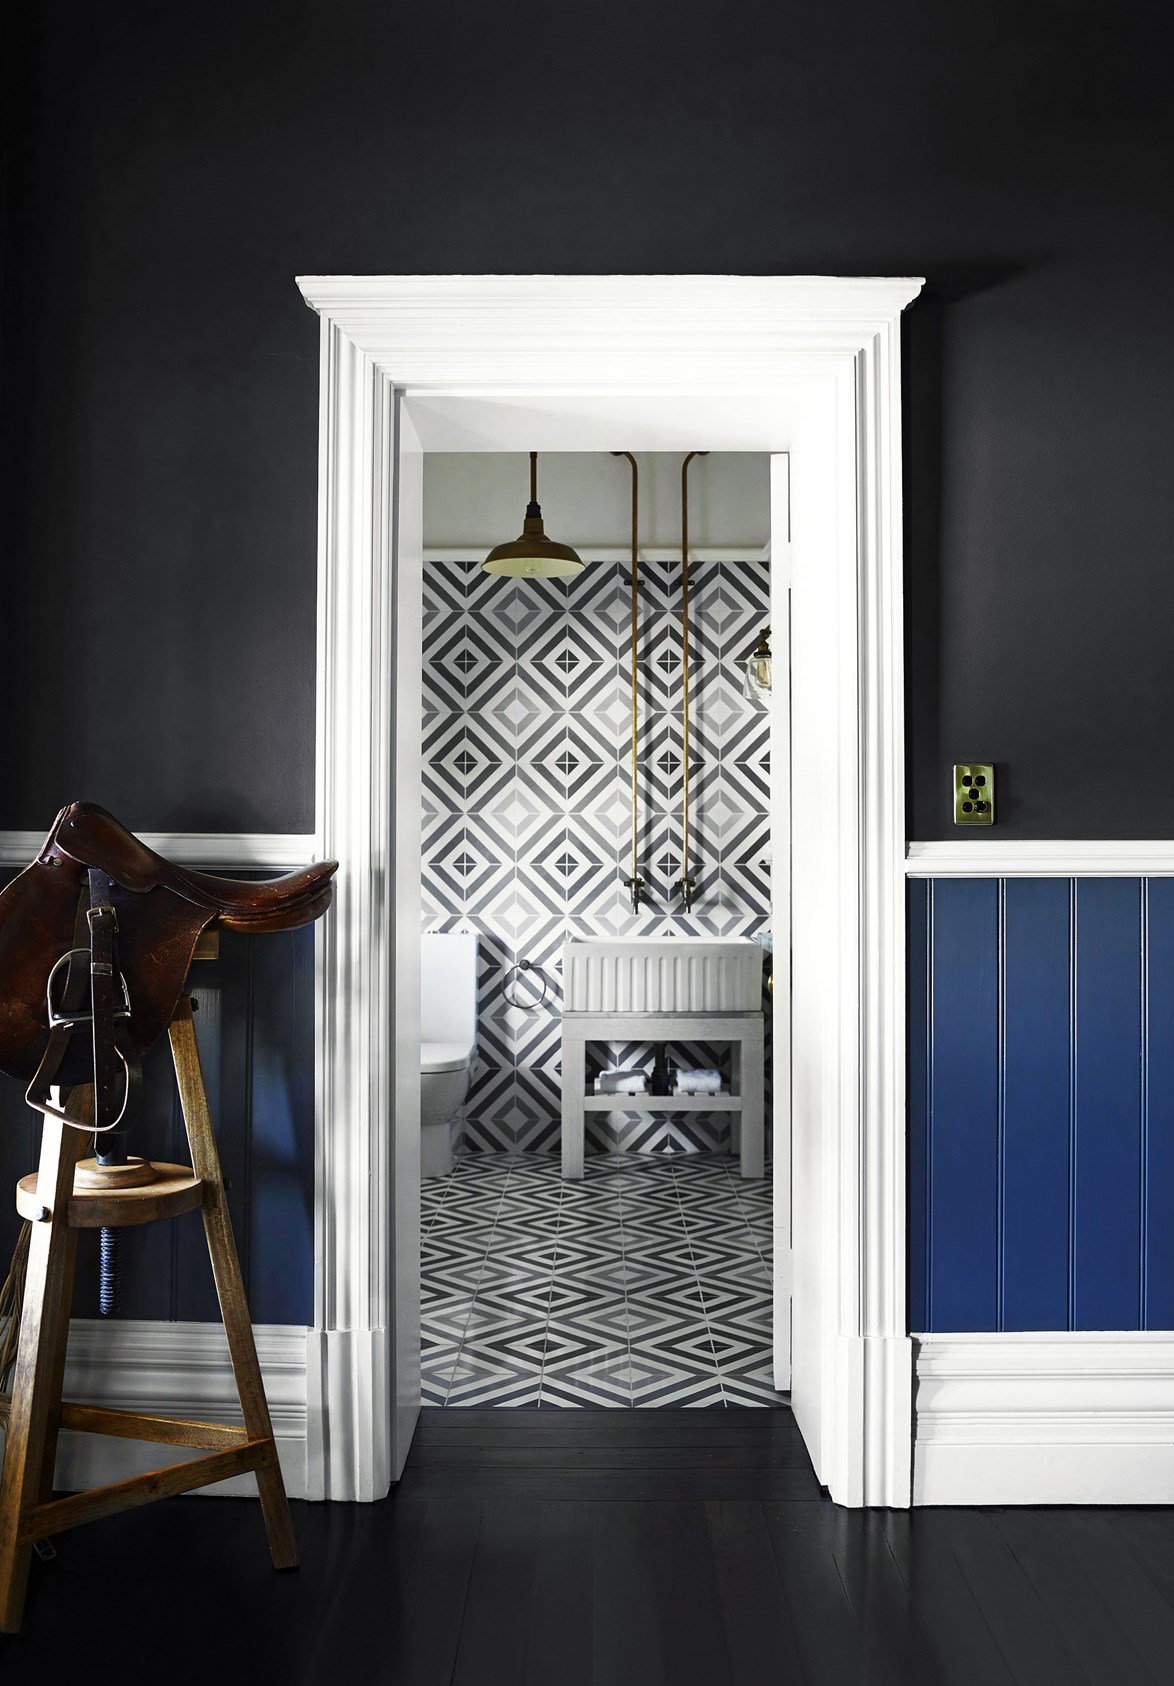 A dramatic powder-room is framed by a doorway in the hallway of a [horse stud homestead](https://www.homestolove.com.au/horse-stud-homestead-country-elegance-2416|target="_blank") redesigned by Greg Natale. A leather saddle on a timber stool is a reminder of the home's country setting.